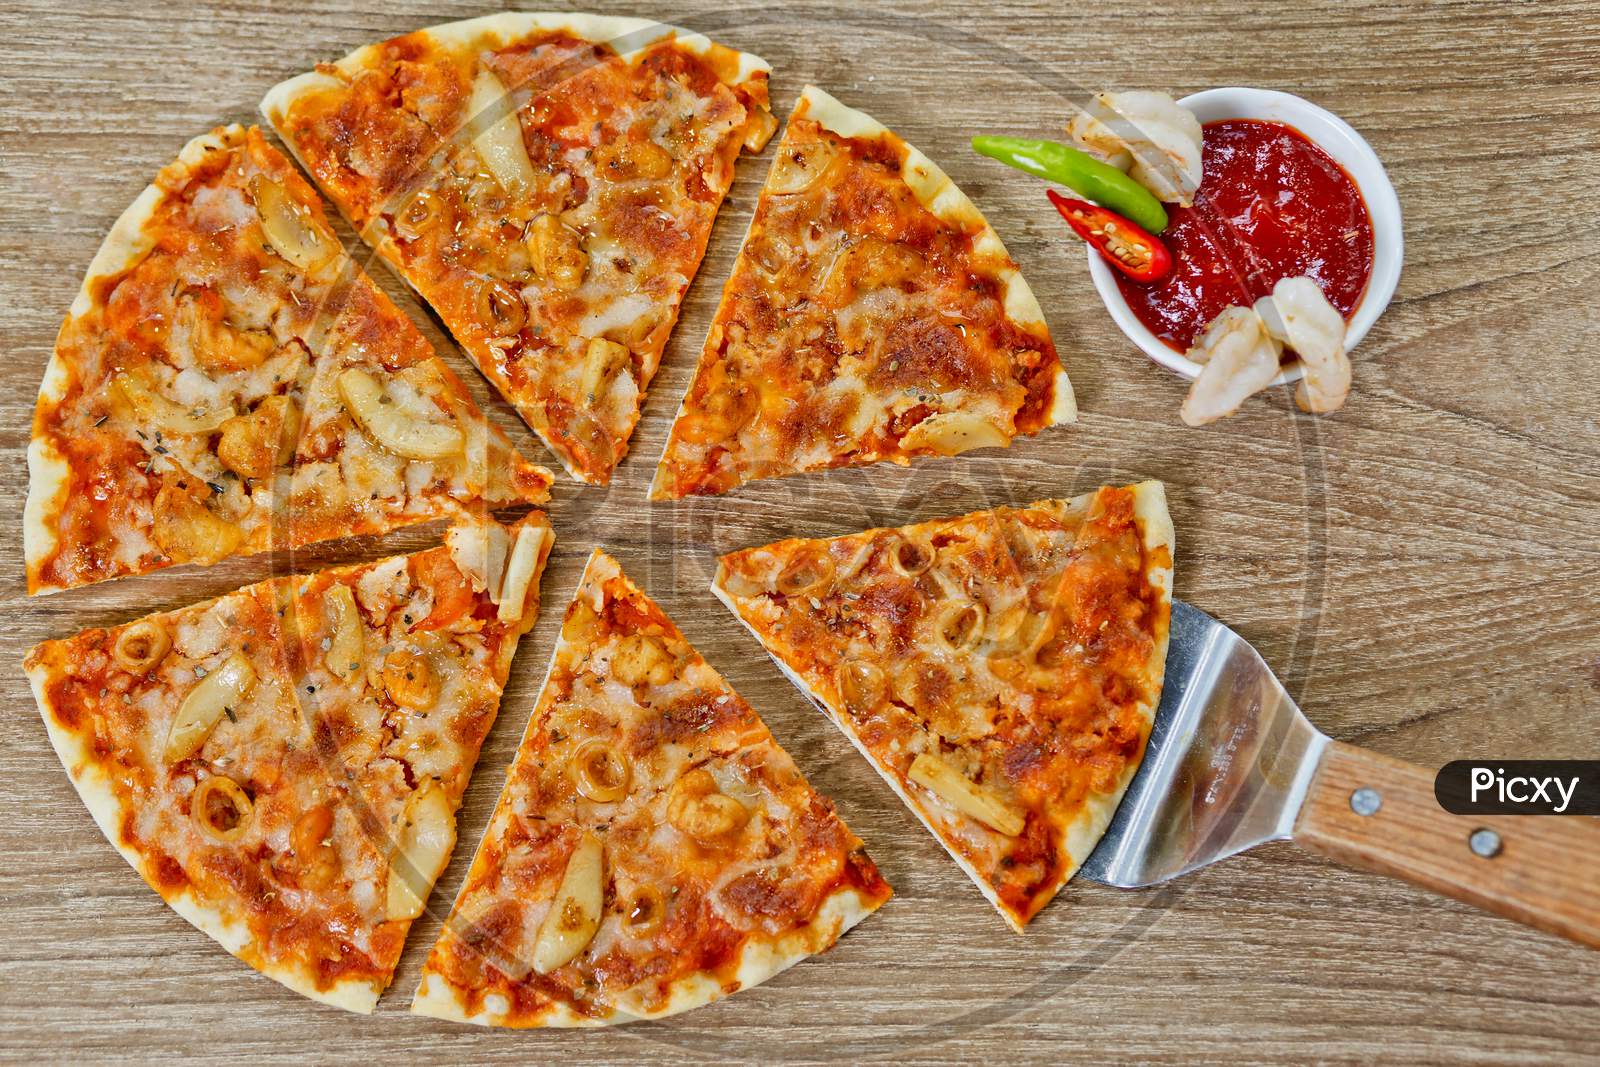 Classic Seafood Pizza With Spicy Chilli Sauce.